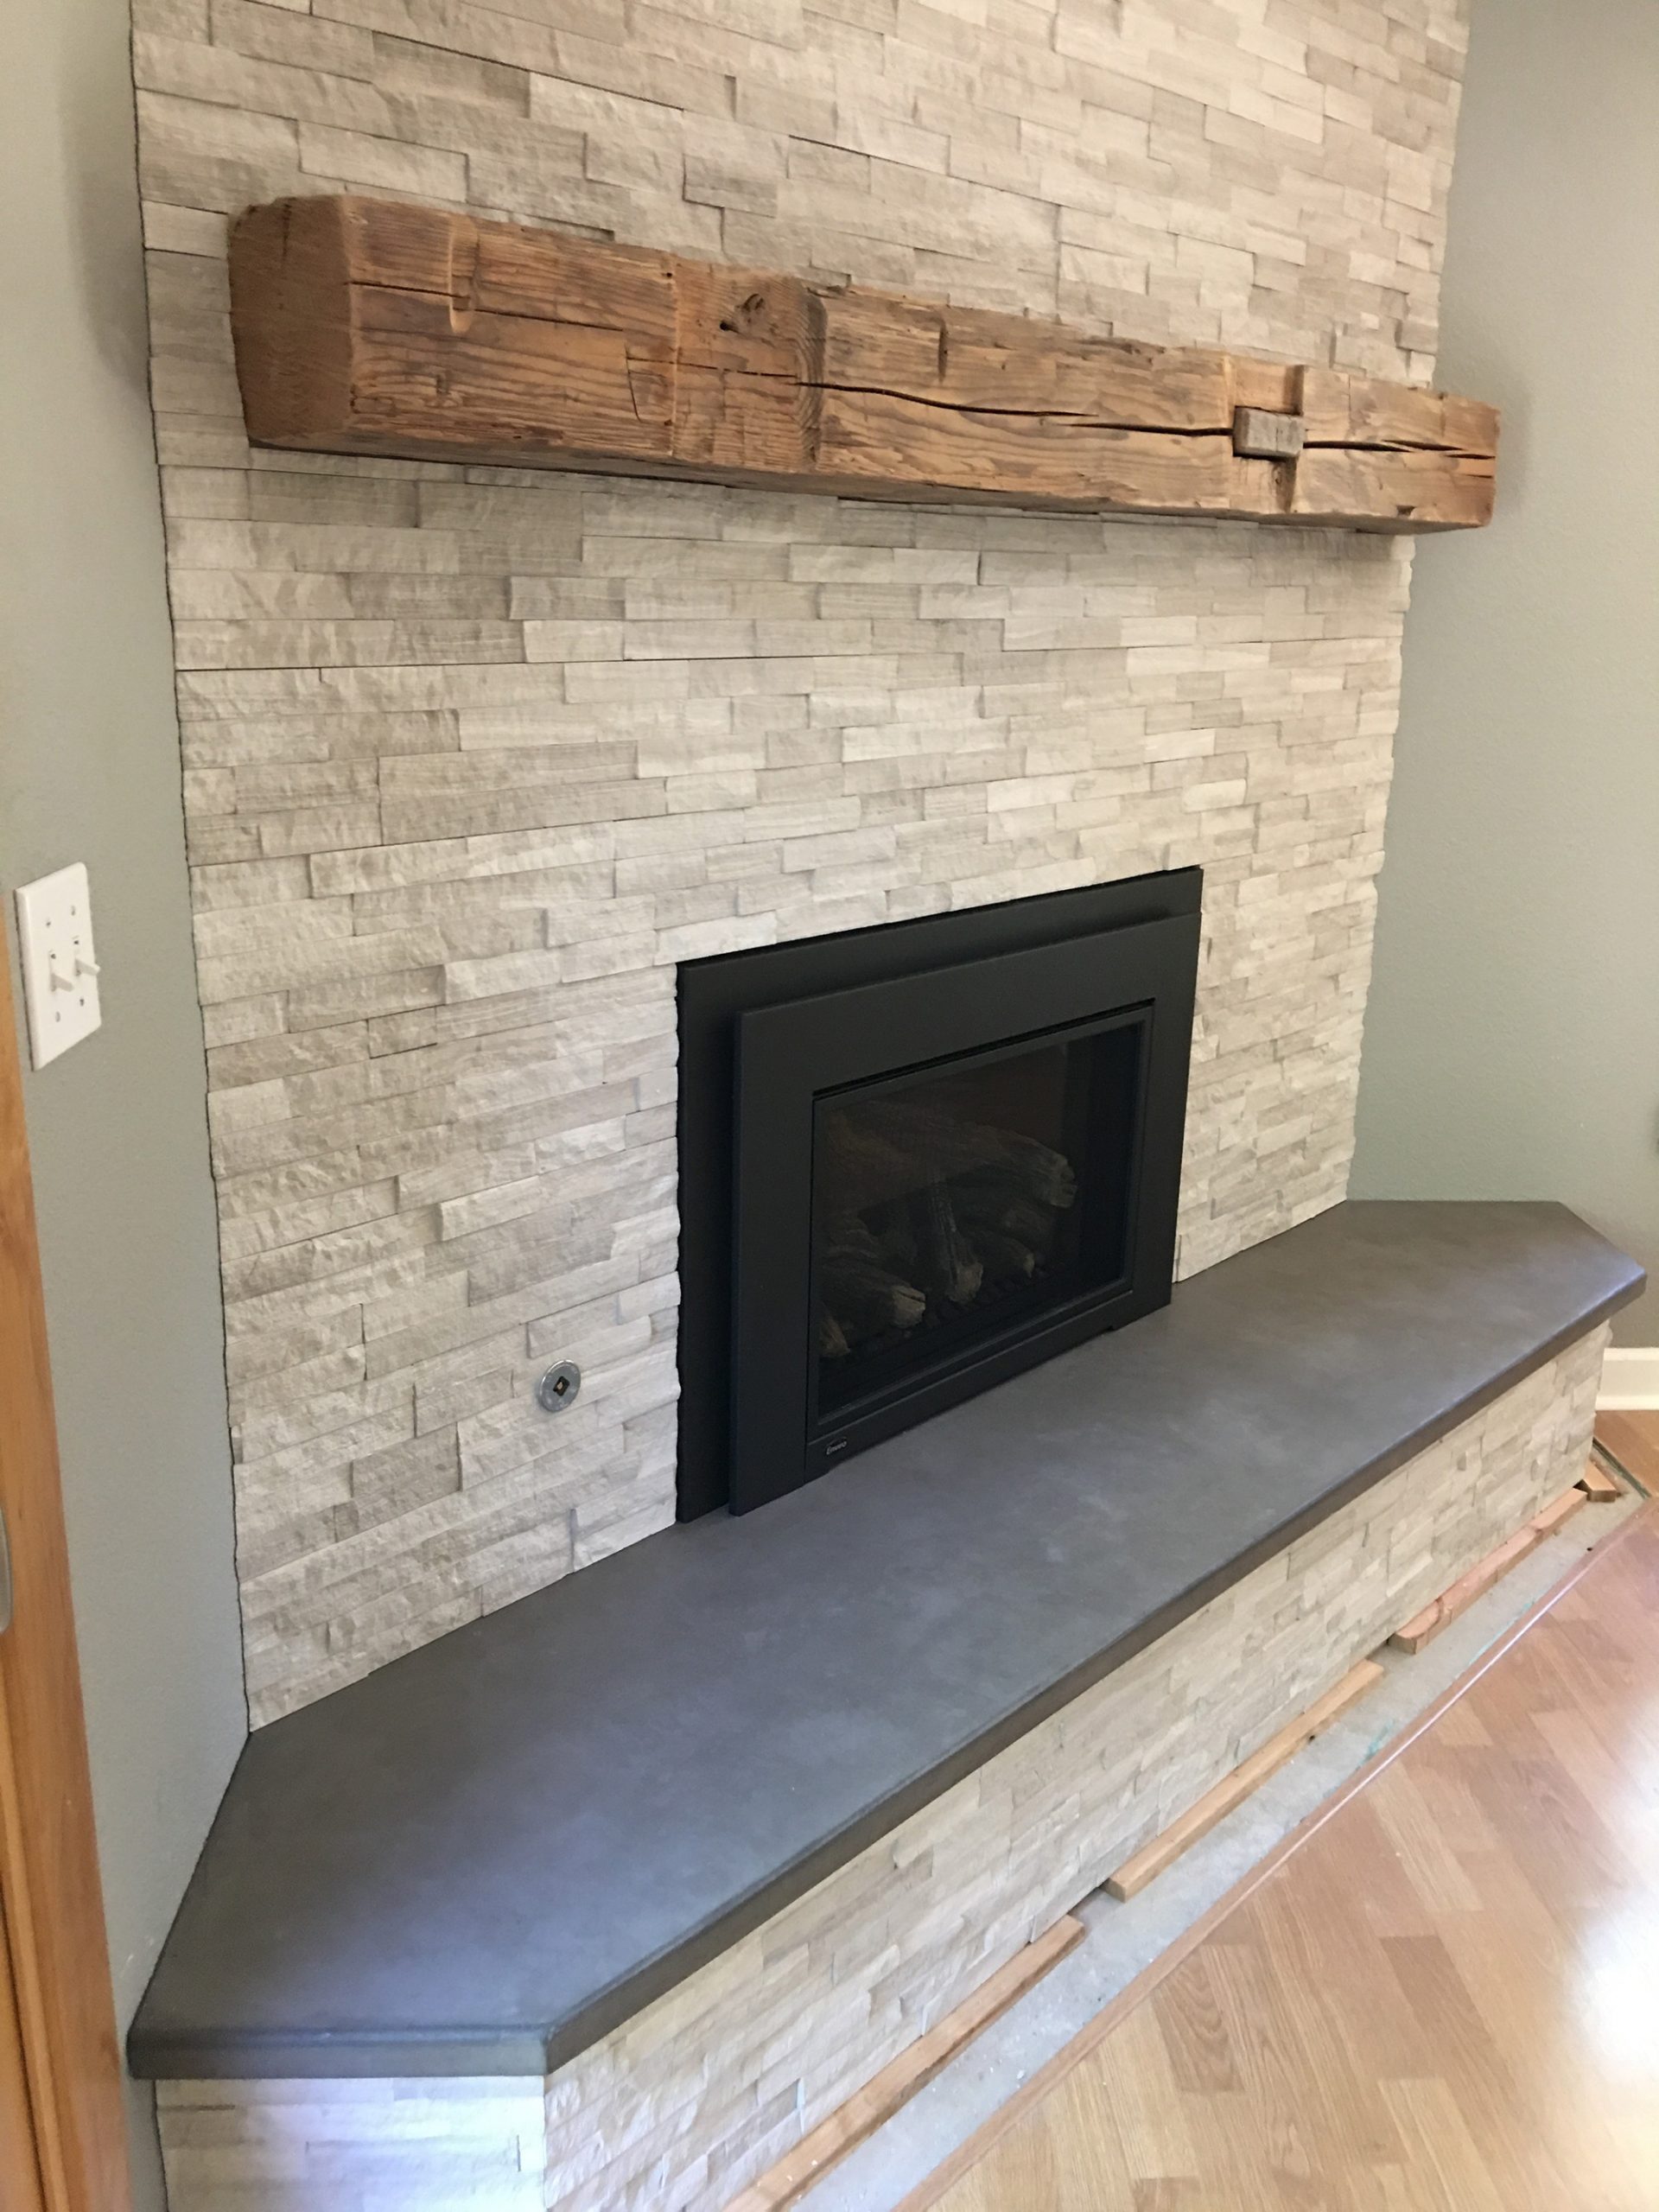 Sandstone Fireplace Hearths Fresh Concrete Fireplaces and Hearths Lawler Construction